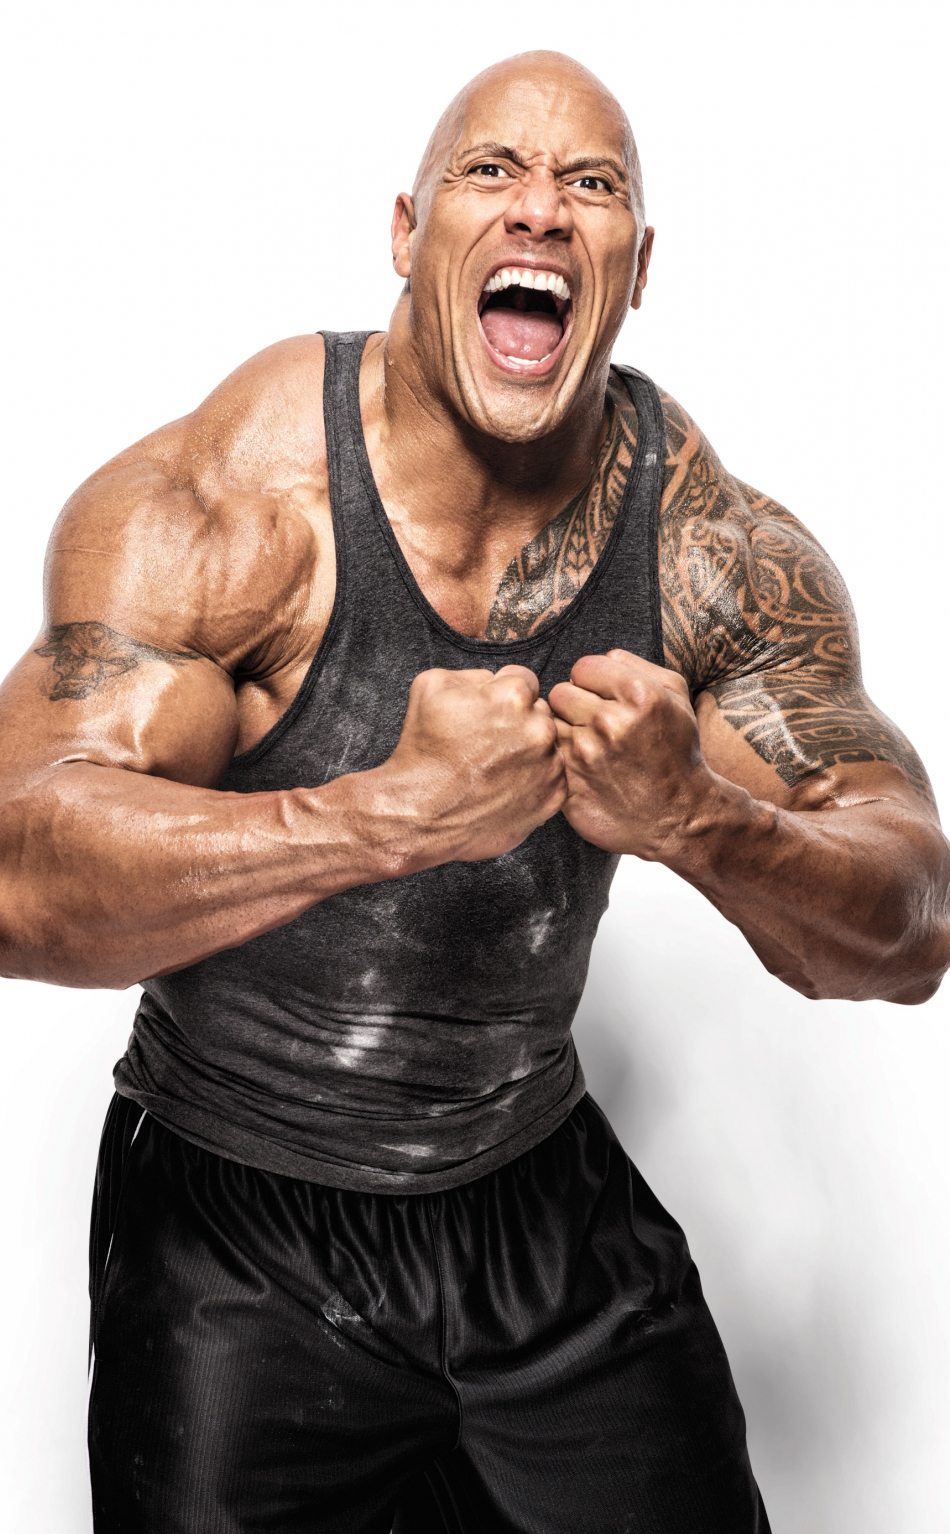 Wallpaper : Dwayne Johnson, actor, man, body, tattoos, athletic build, T  shirt, bald 2560x1600 - CoolWallpapers - 732915 - HD Wallpapers - WallHere